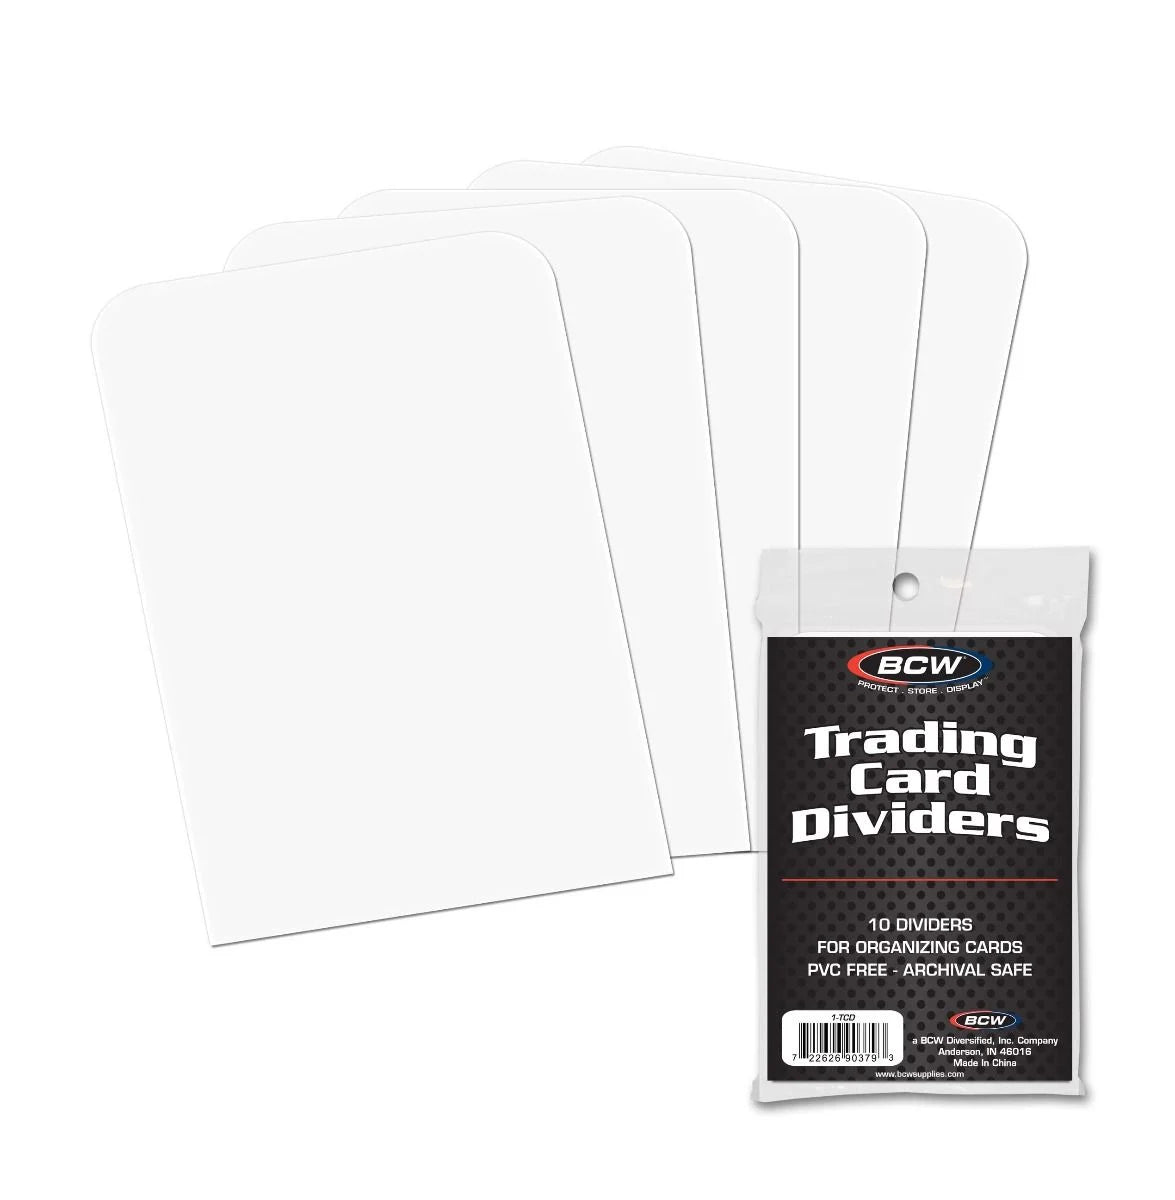 Trading Card Dividers